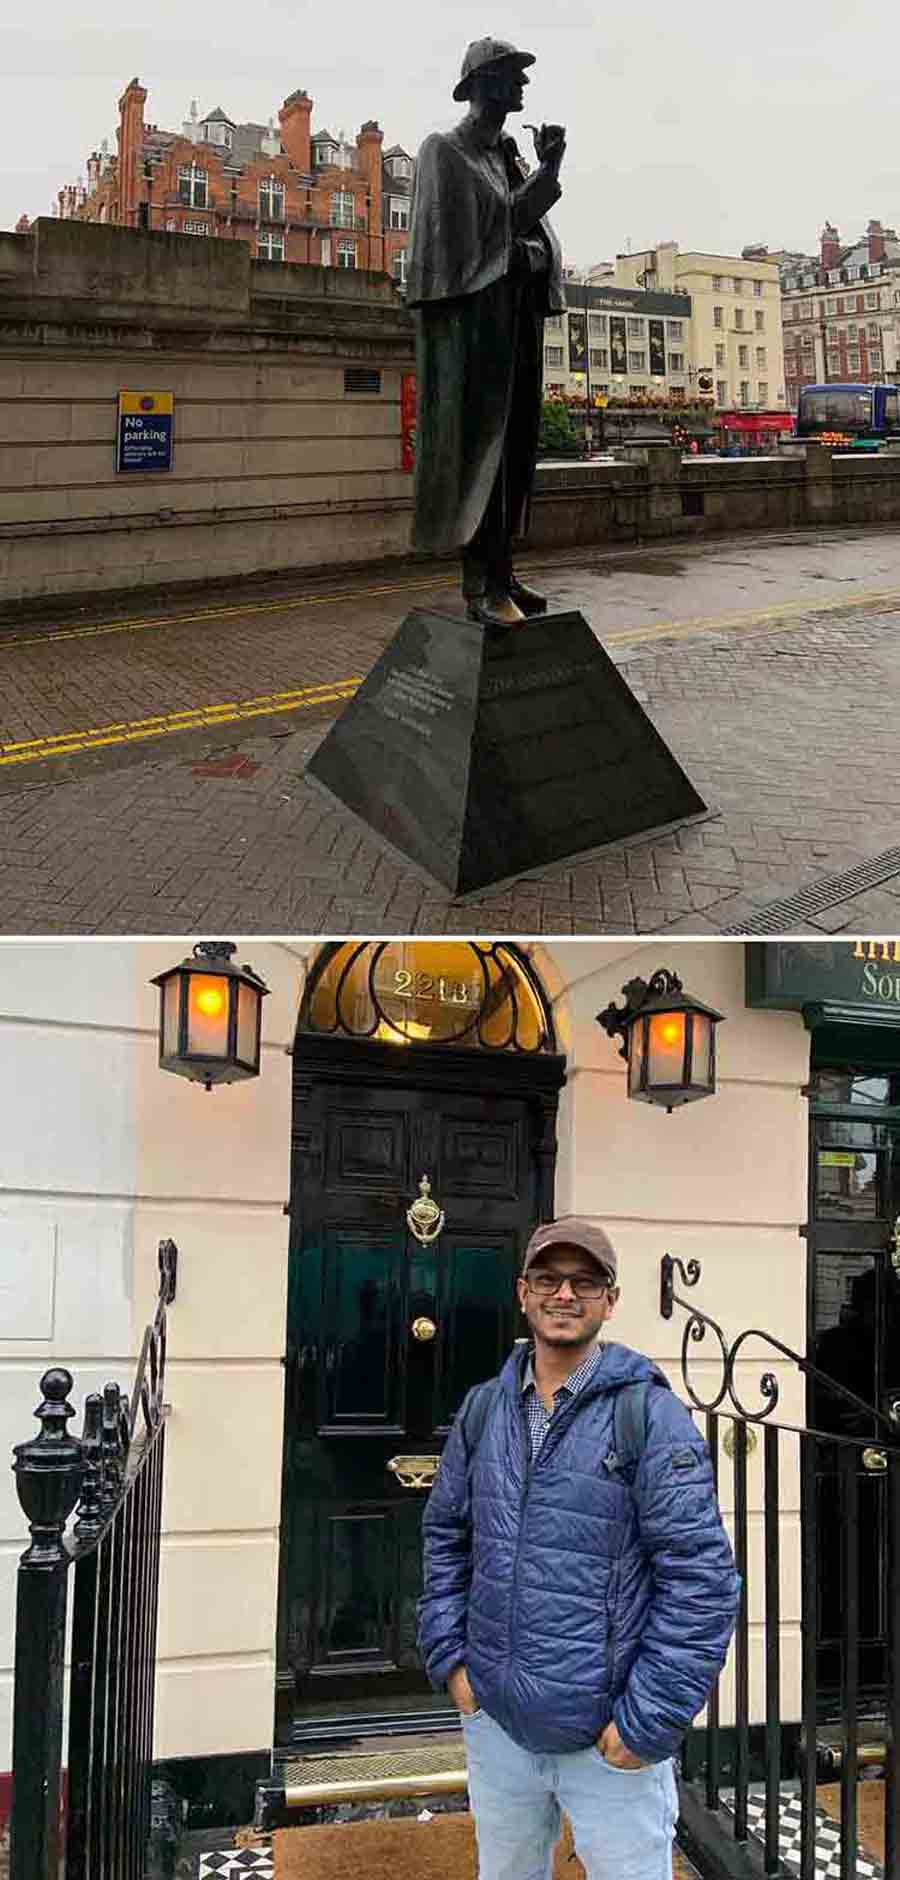 (Top) The statue of Sherlock Holmes near the station and (above) “Guru tumi chhile bole amra achhi. Aaj amar London asha sarthok holo,” Feluda had said in the book ‘London-e Feluda’. He must have stood somewhere around here when he said this. I was following a route Google Maps showed me to the nearest underground station (Baker Street station, to be precise) on a rainy evening when I realised the Sherlock Holmes Museum was on the next street. I decided I had to take a picture of this door marked ‘221B’ next to the museum